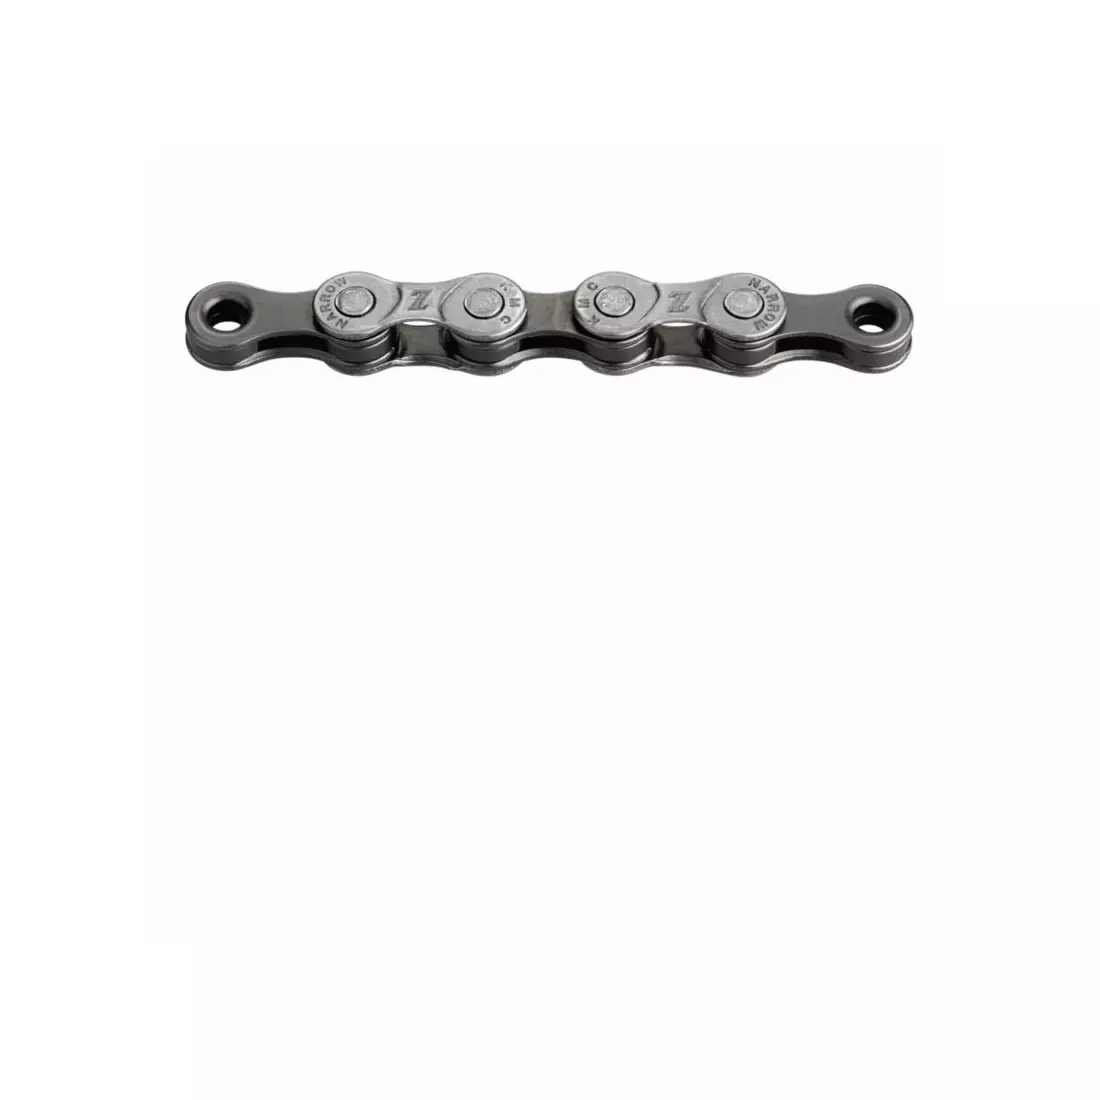 KMC Z8.3 bicycle chain 116 links, silver gray